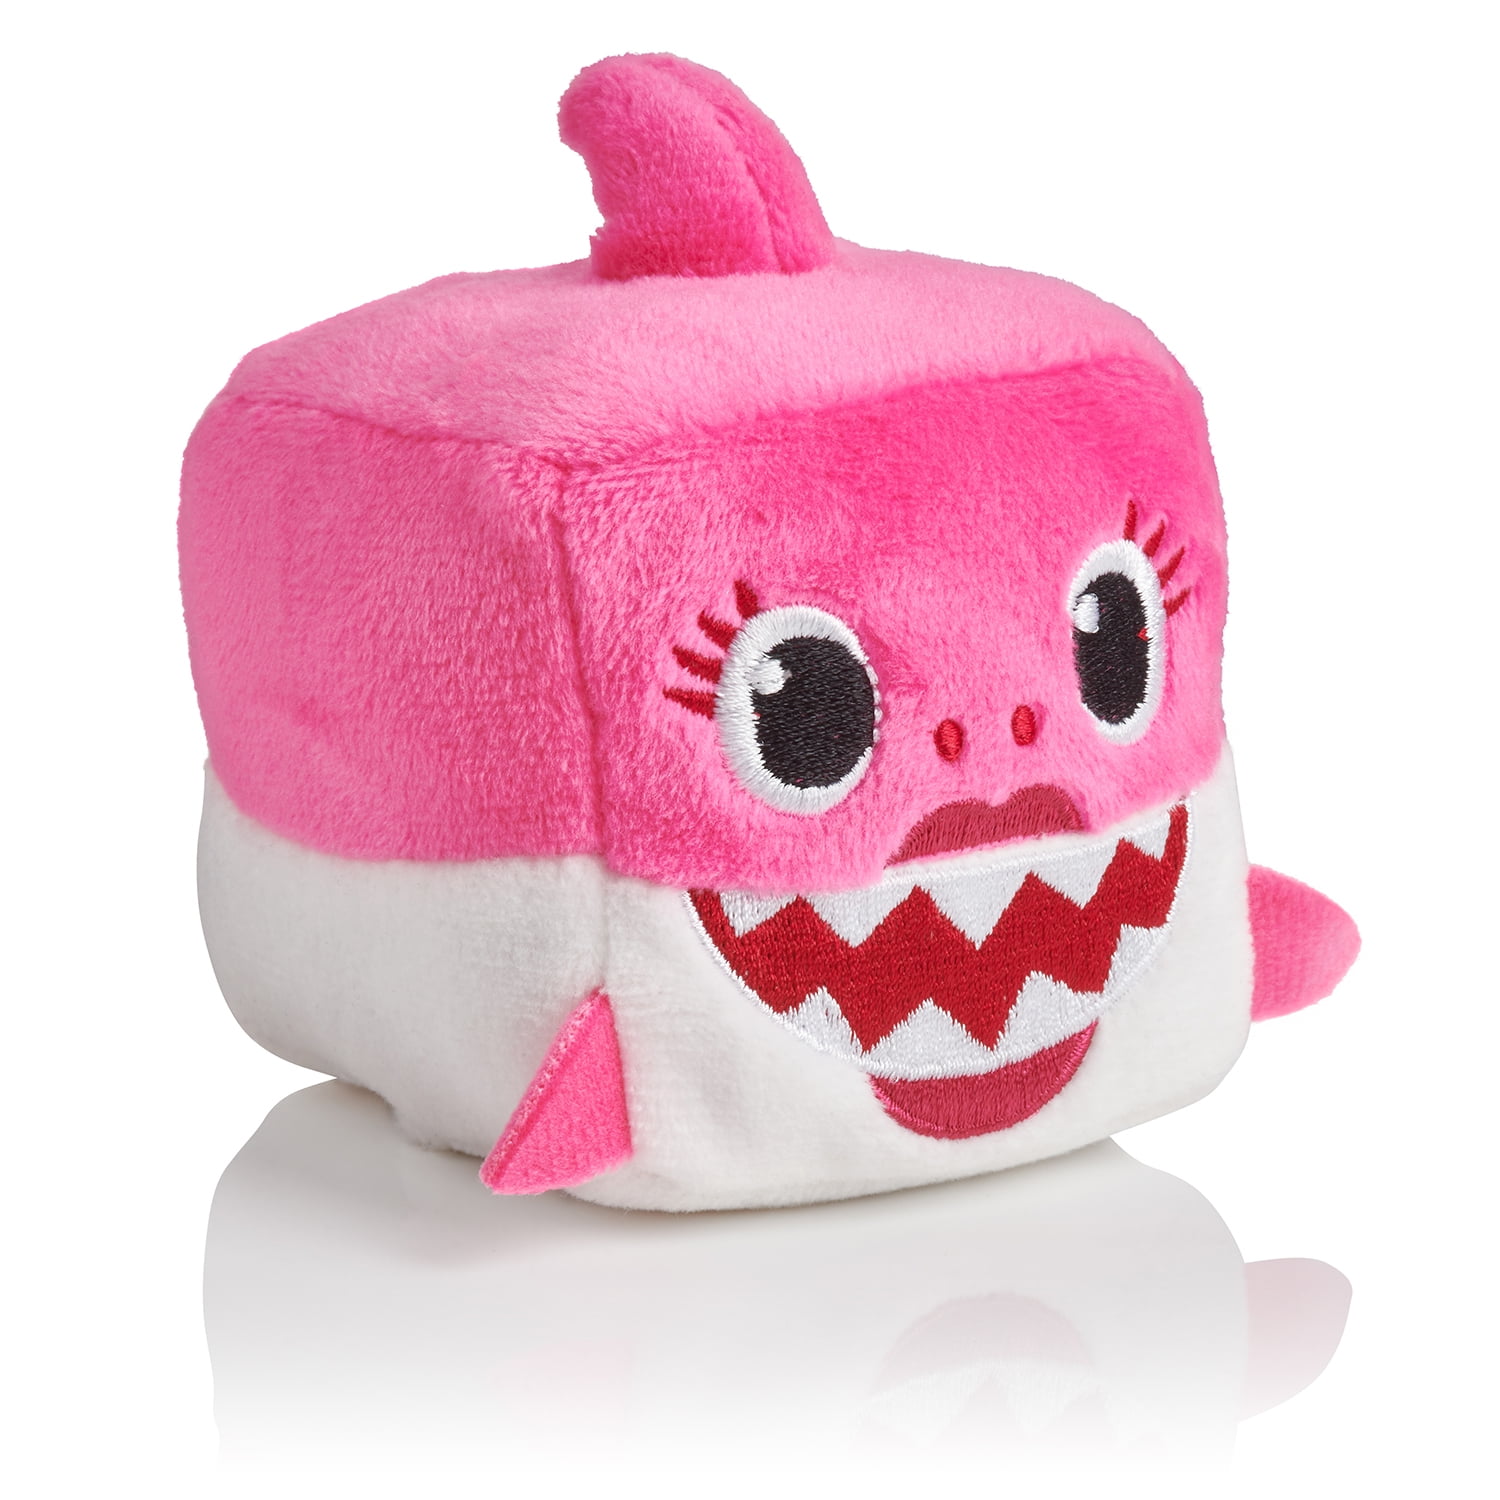 NEW Baby Shark Mommy Shark PINK Mini Plush Stuffed Beanie Animal by Pinkfong Toy